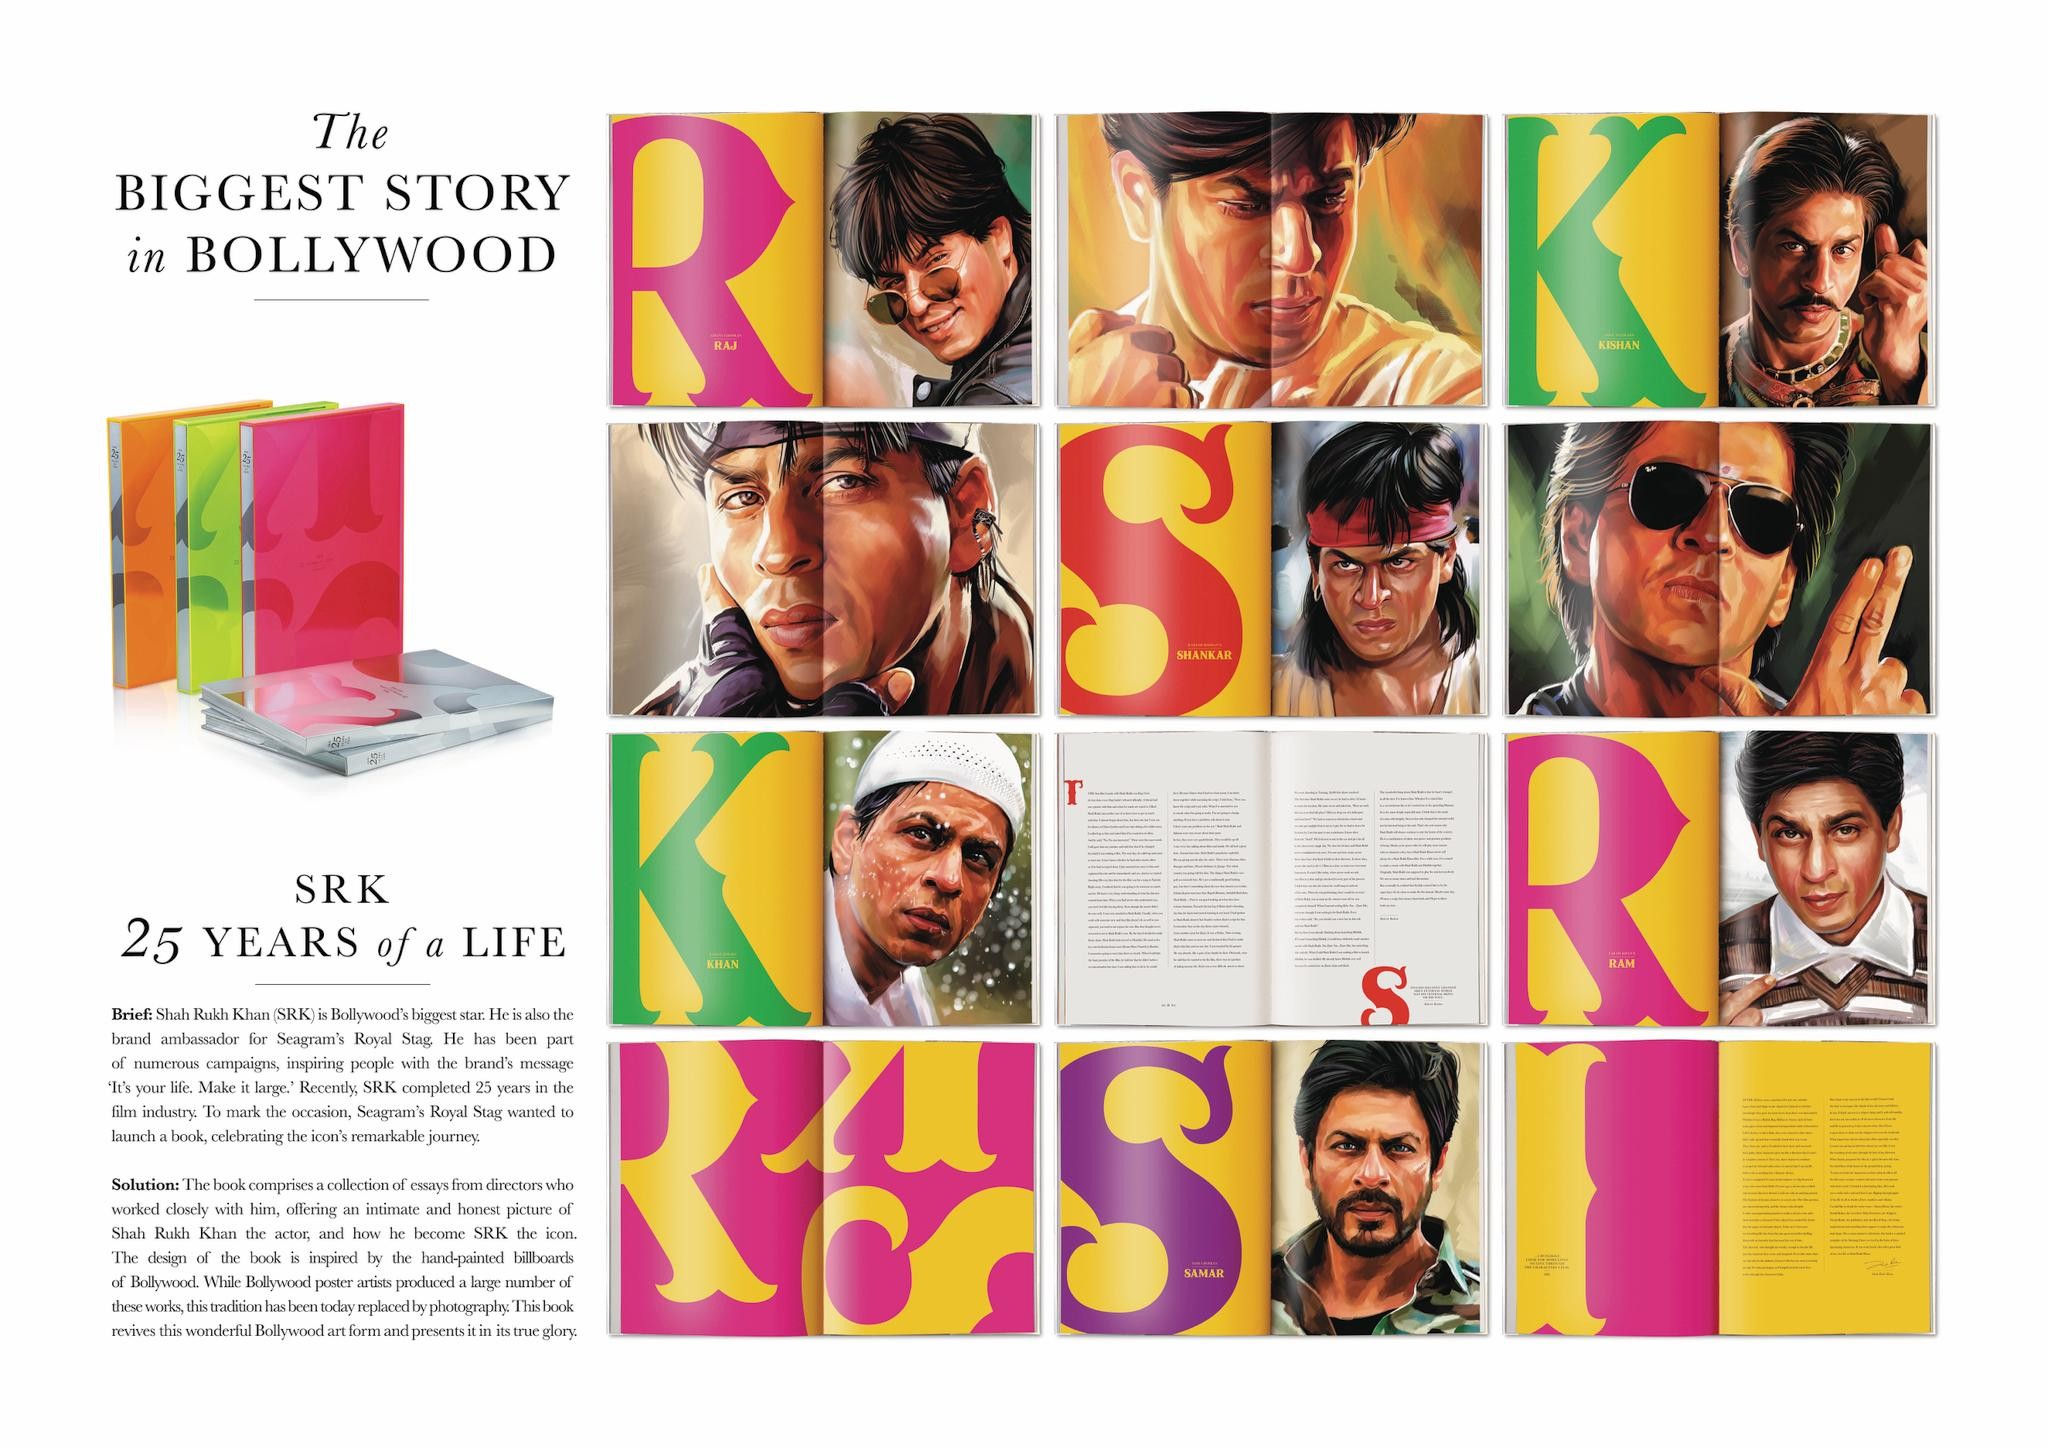 SRK - 25 Years of a Life